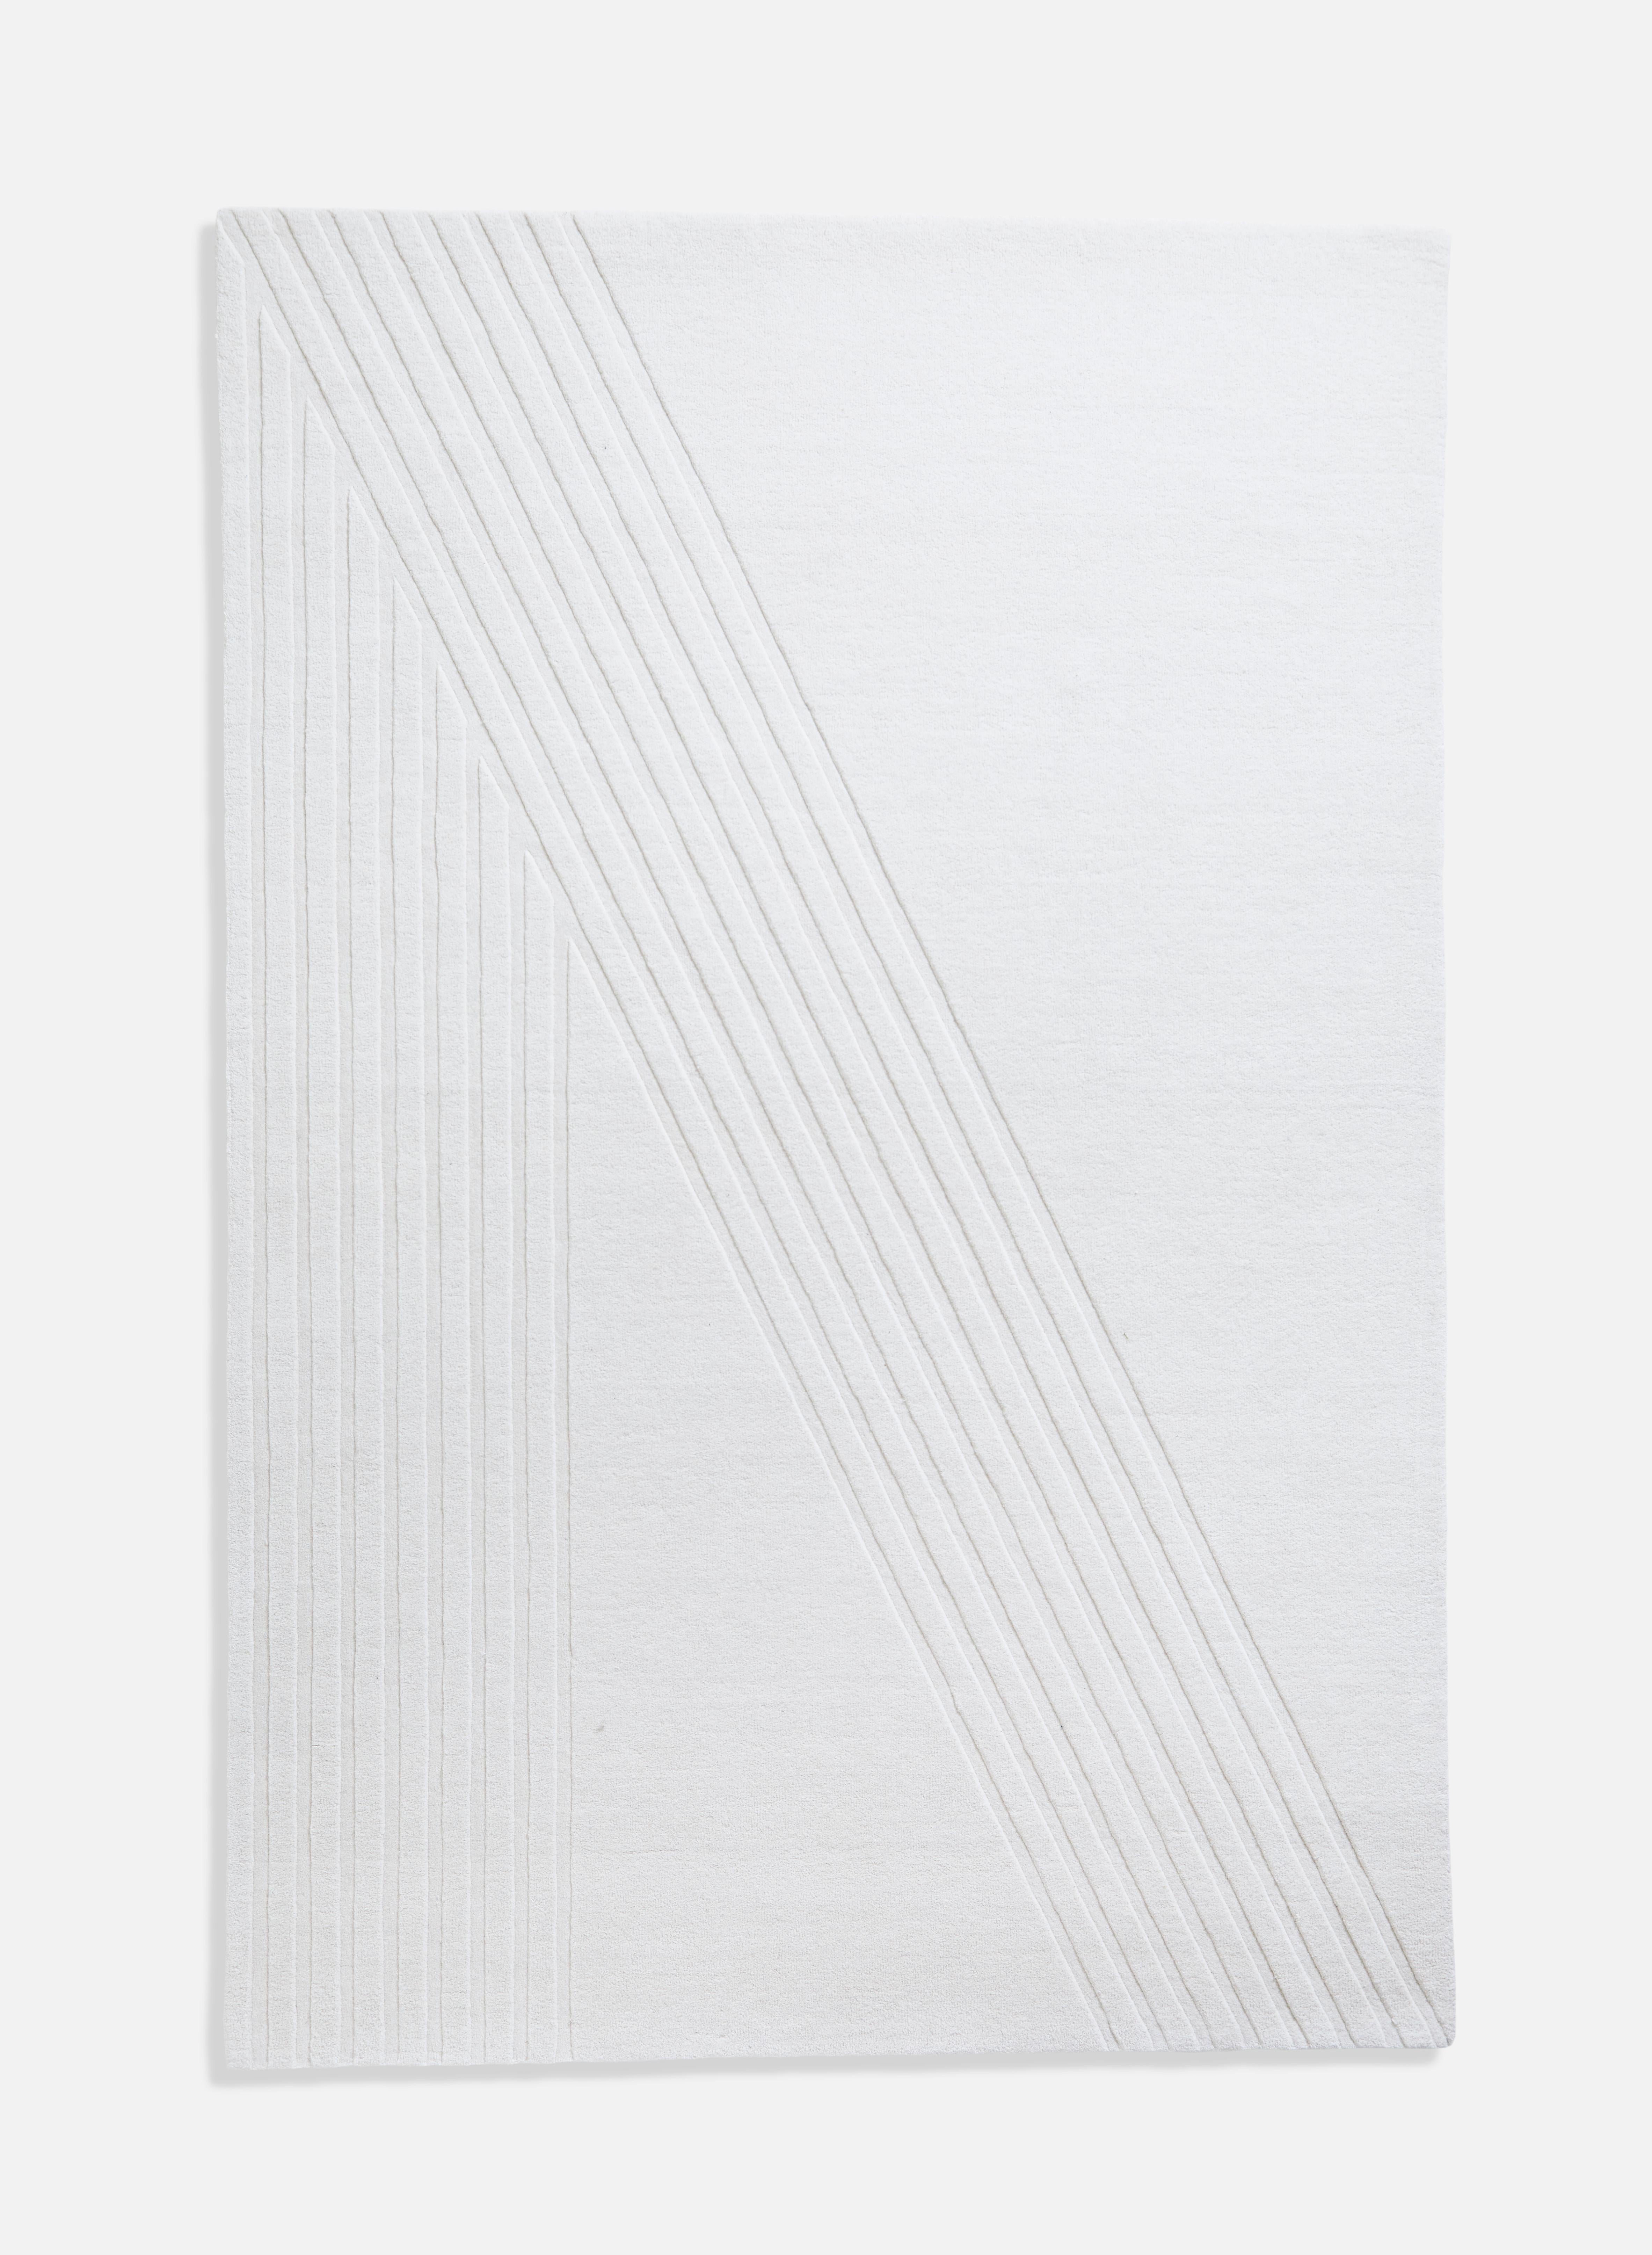 Post-Modern White Kyoto Rug IV by AD Miller For Sale